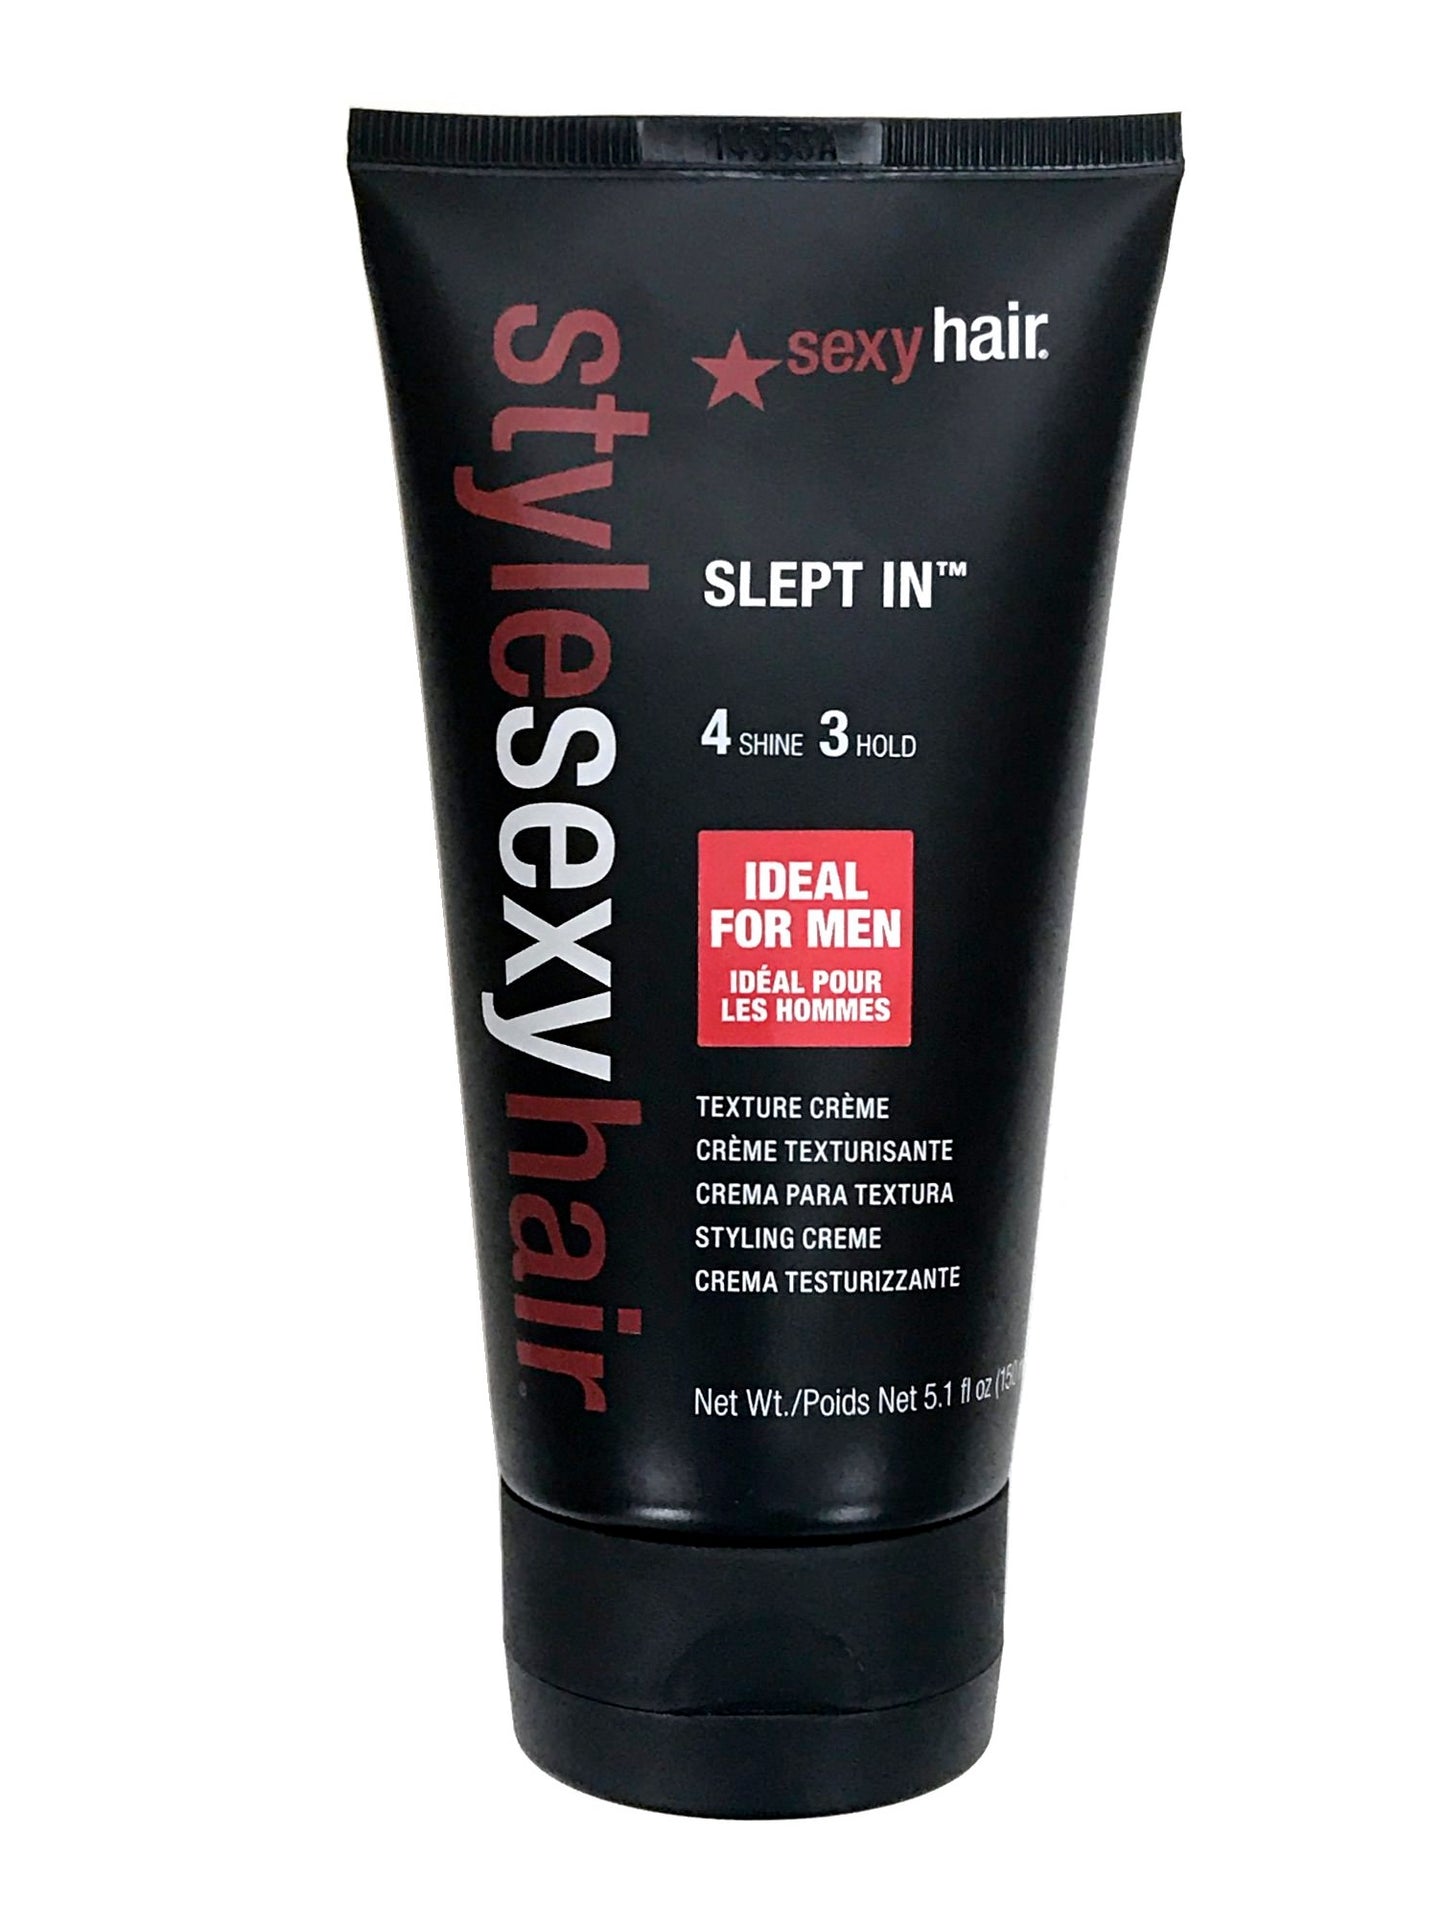 Style Sexy Hair Slept In Texture Creme 5.1 oz (4 Shine + 3 Hold)